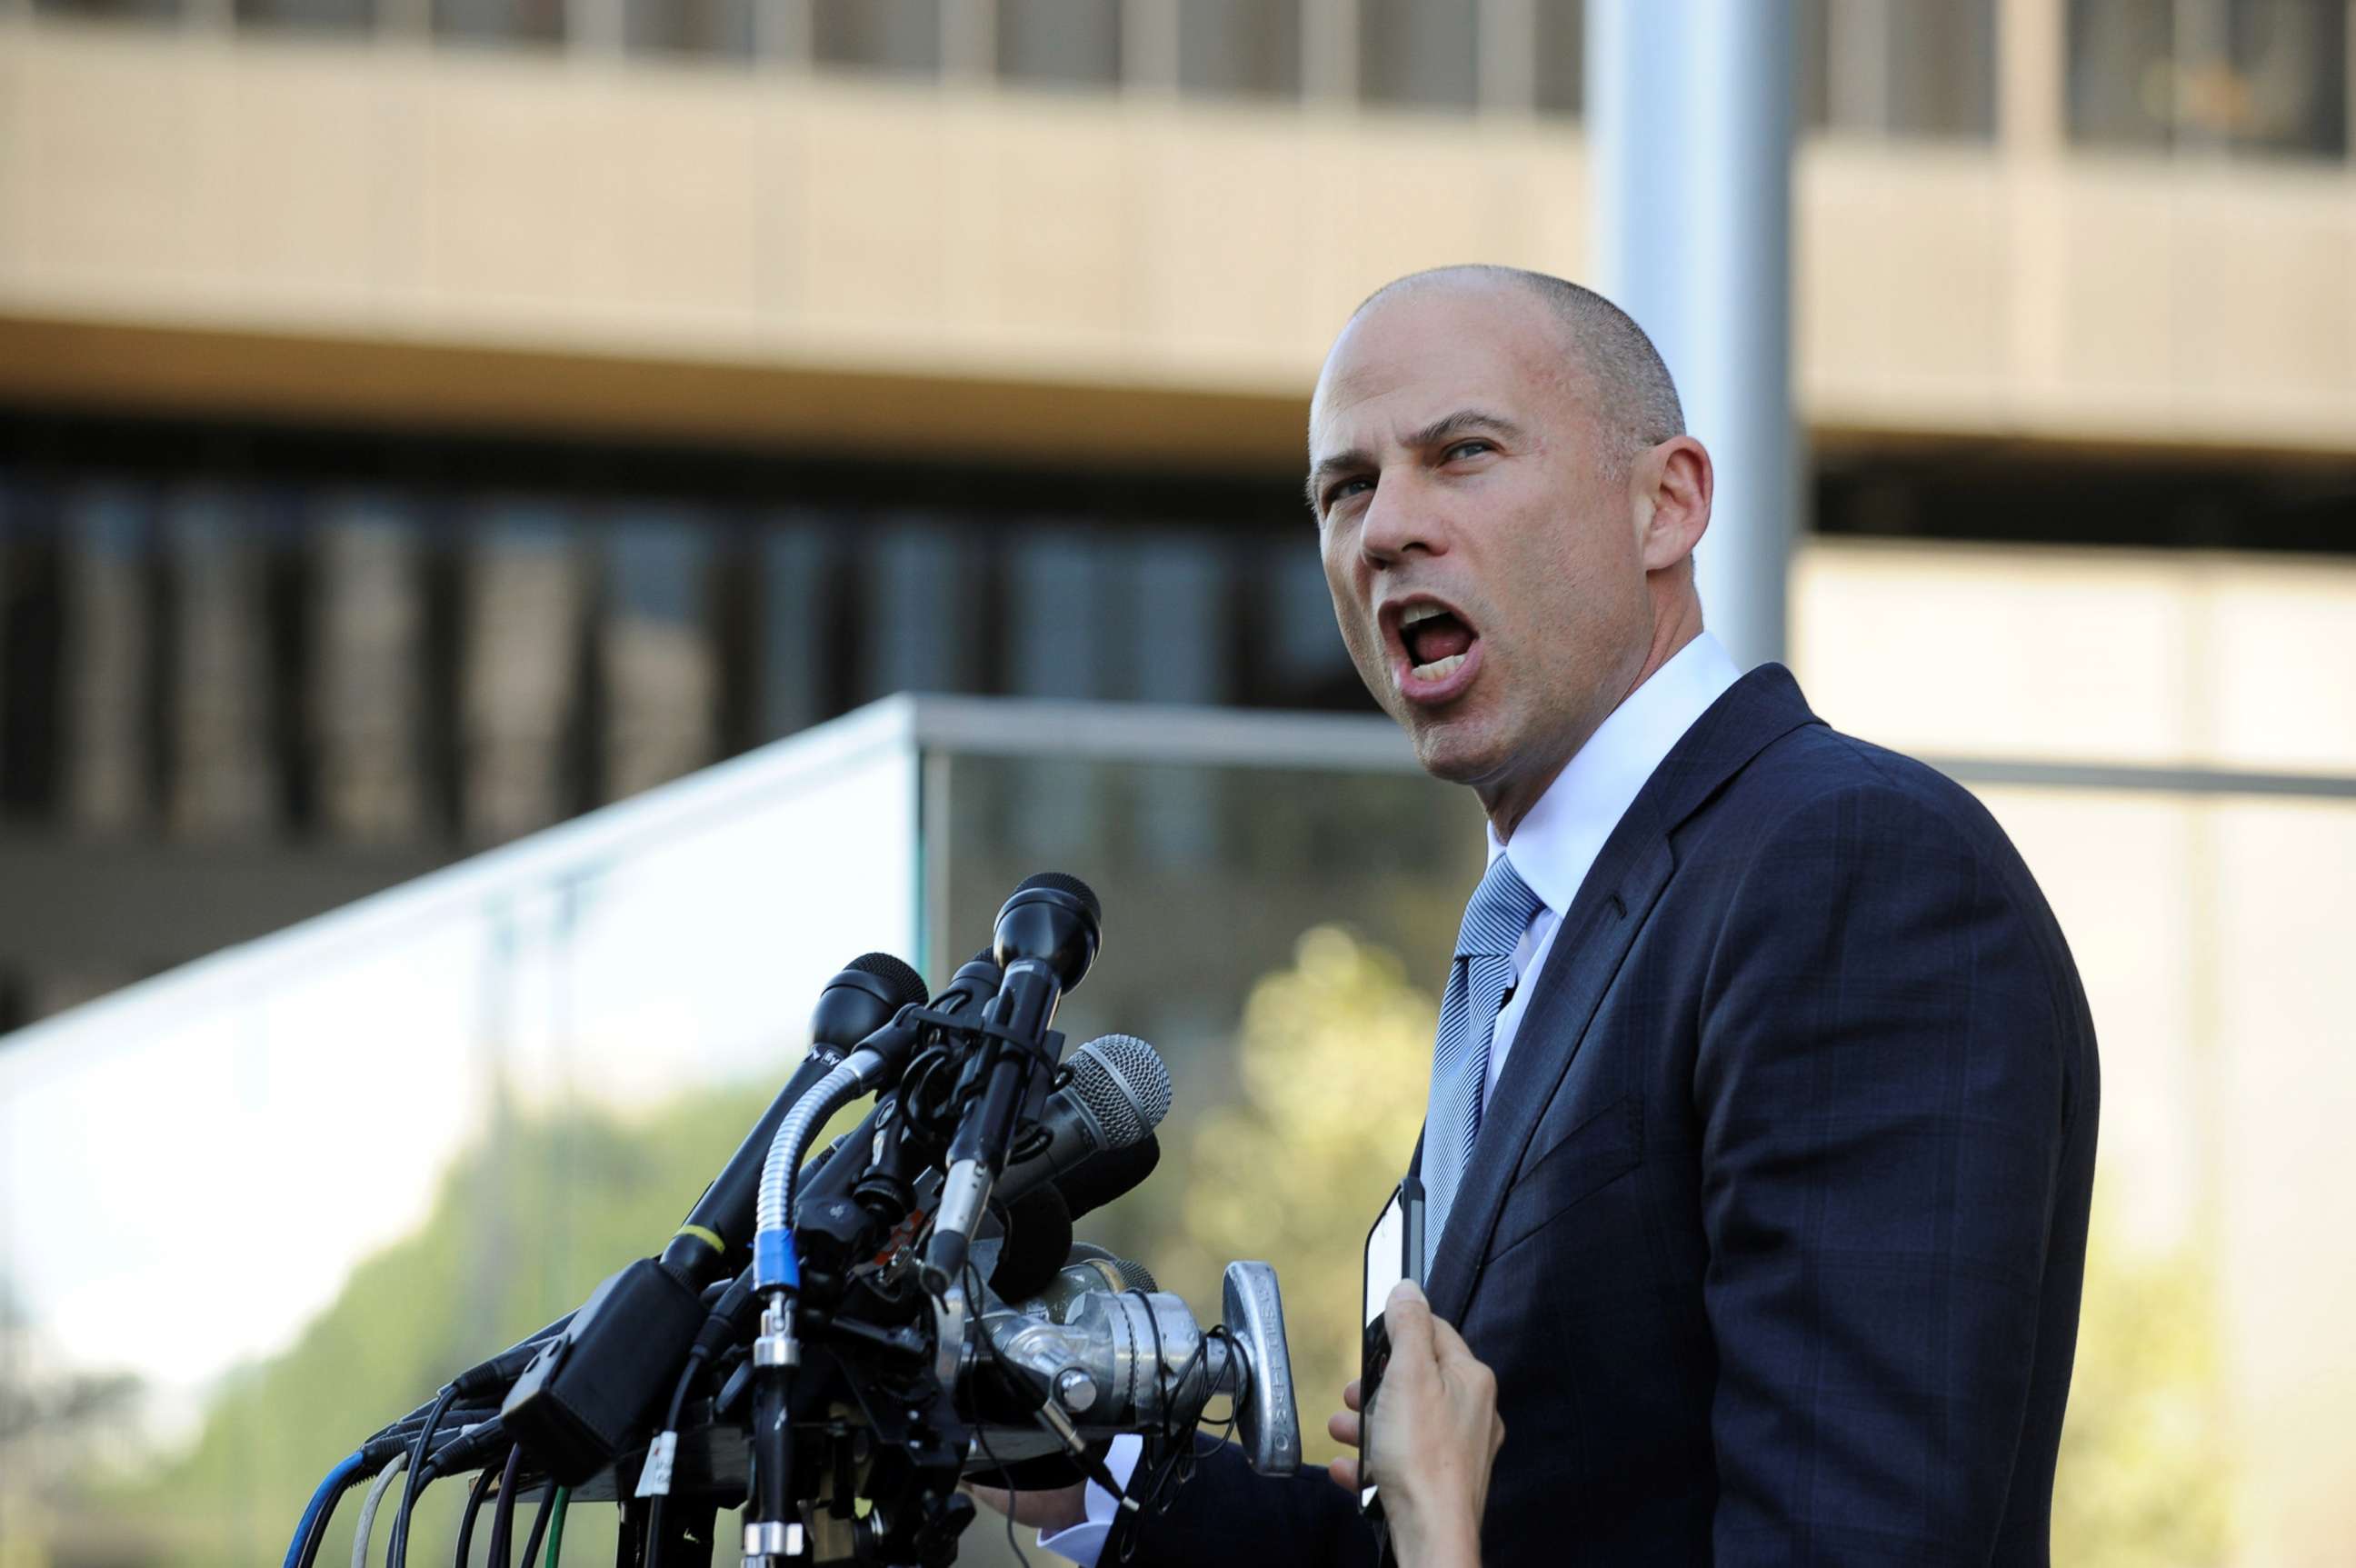 PHOTO: Lawyer Michael Avenatti speaks to the media outside the U.S. District Court in Los Angeles, Sept. 24, 2018.